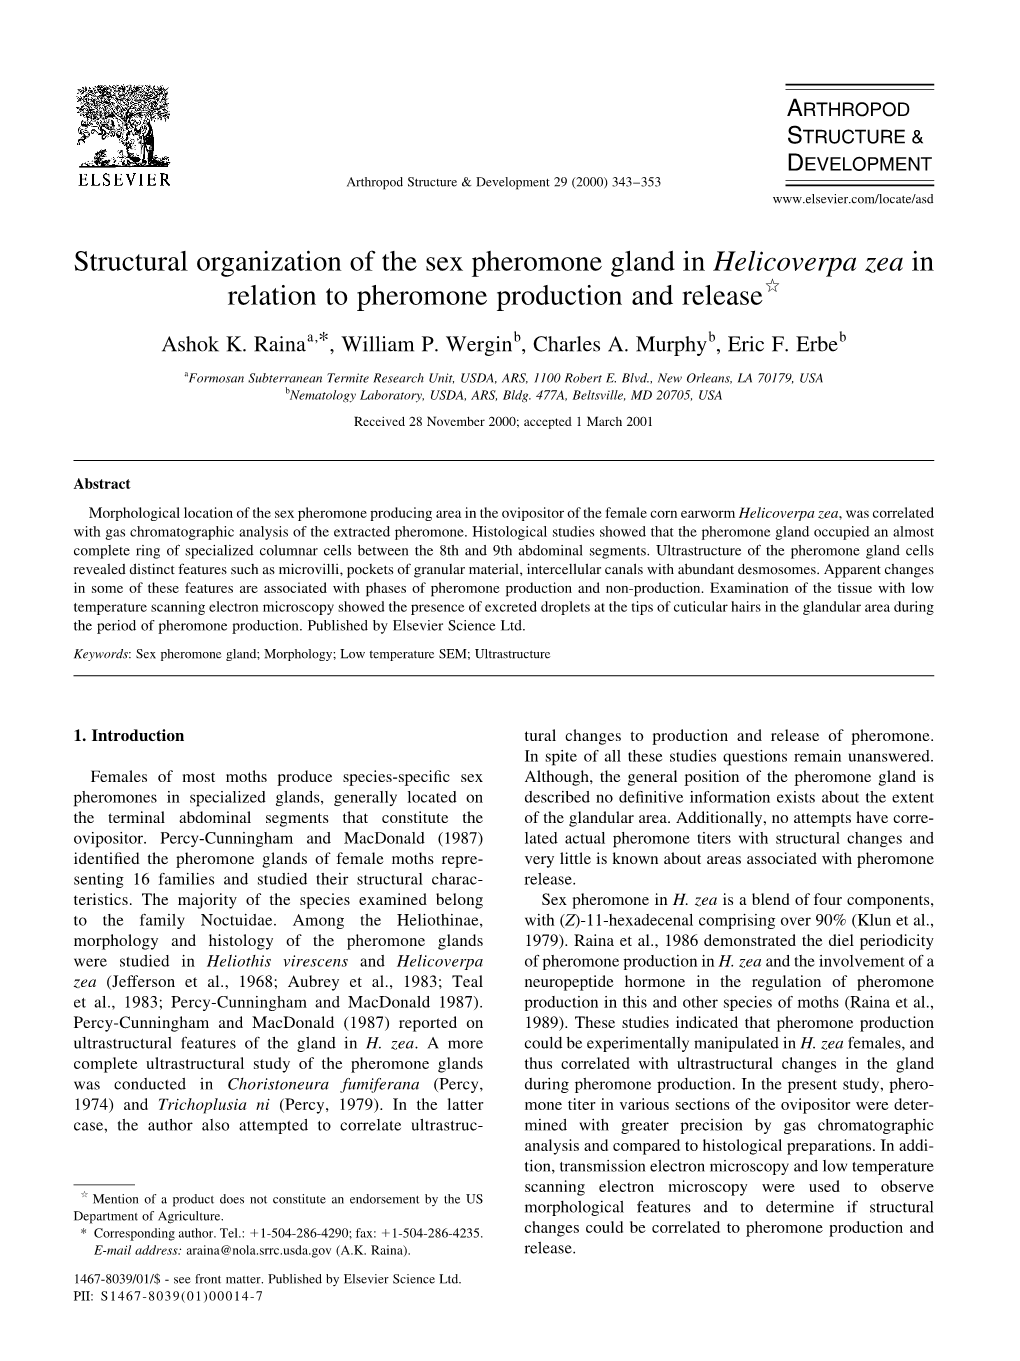 Structural Organization of the Sex Pheromone Gland in Helicoverpa Zea in Relation to Pheromone Production and Releaseq